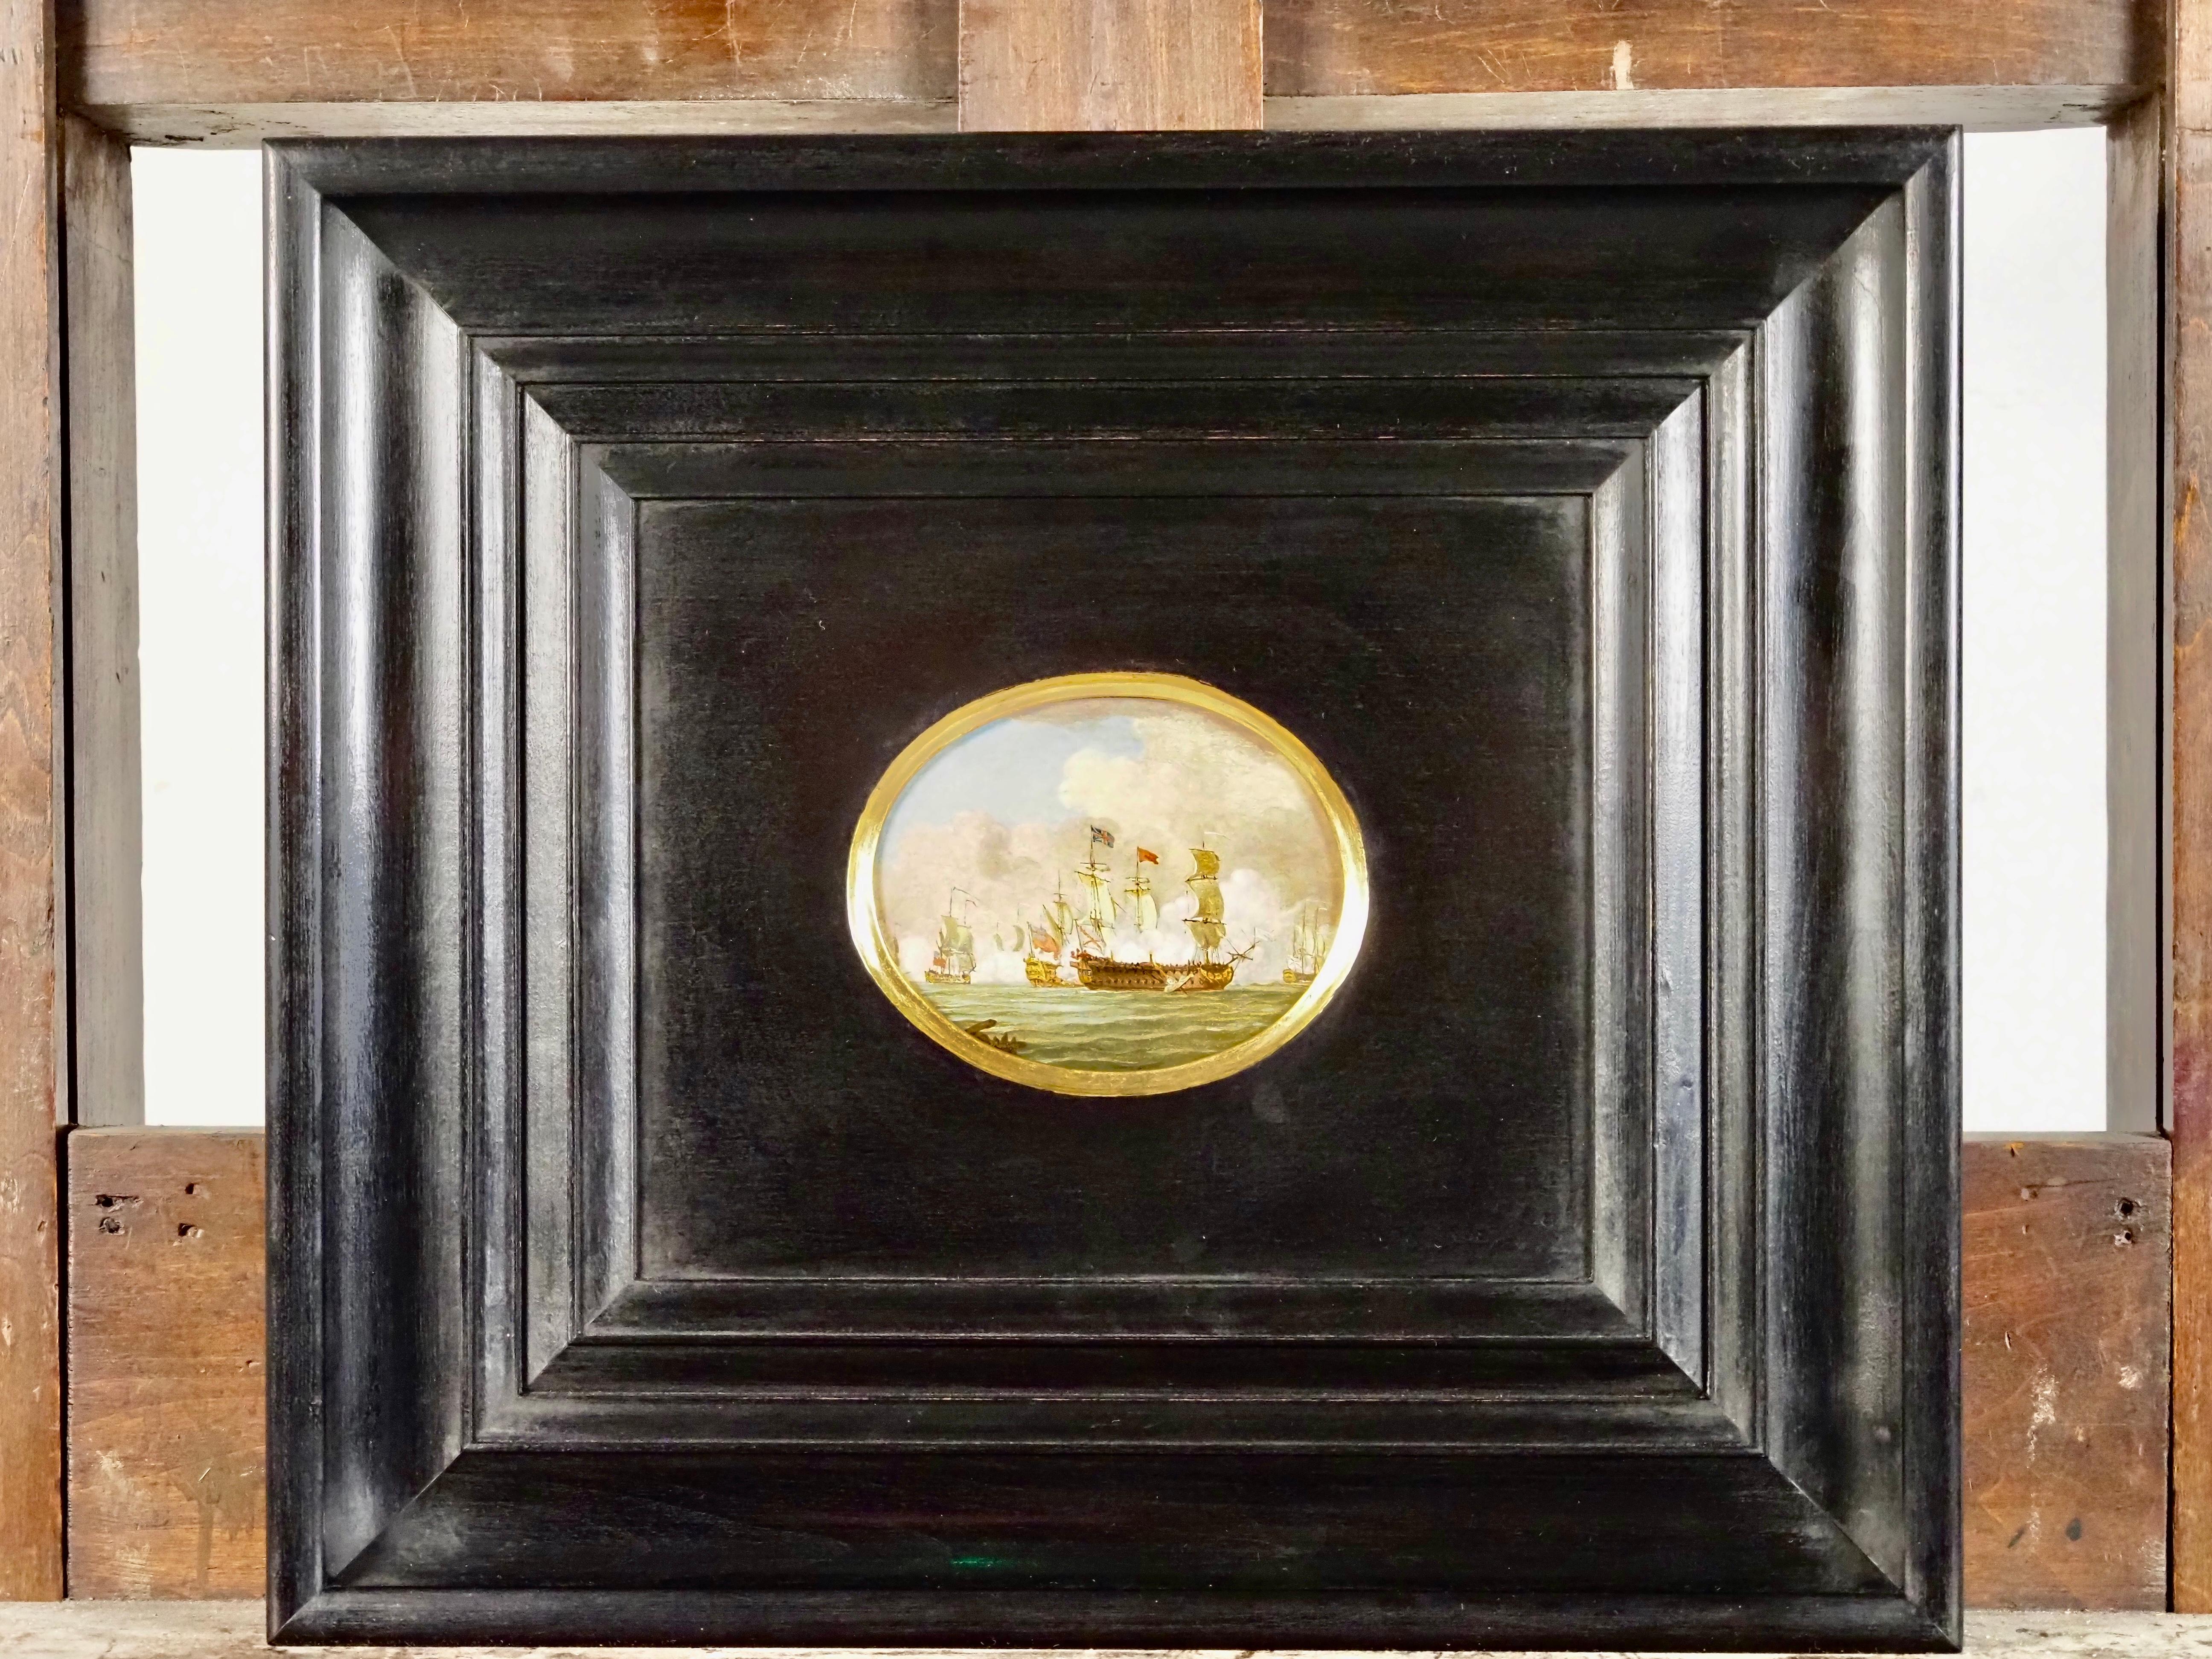 Francis Swaine (1725-1782)
A Naval engagement
Oil on panel
Oval
Painting size - 4 x 5 in
Framed size - 15 x 16 3/4 in

Little is known about Swaine’s early career, although Royal Navy records from 1735 show him listed as a messenger. Similarly to